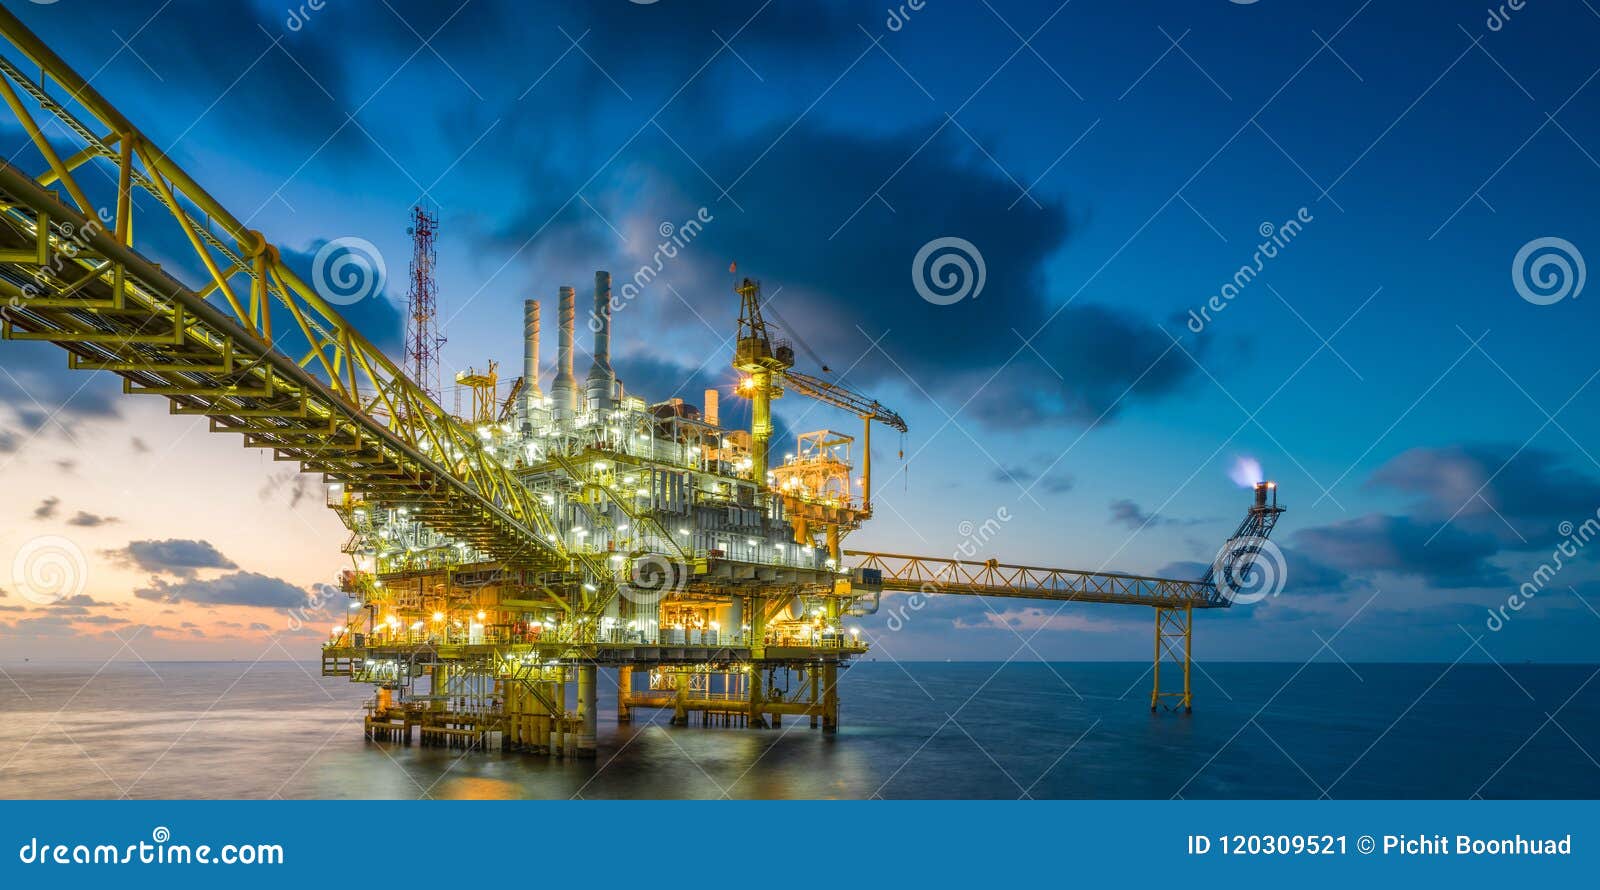 offshore oil and gas central processing platform in sun set where produced raw gases and treat then sent to onshore refinery.